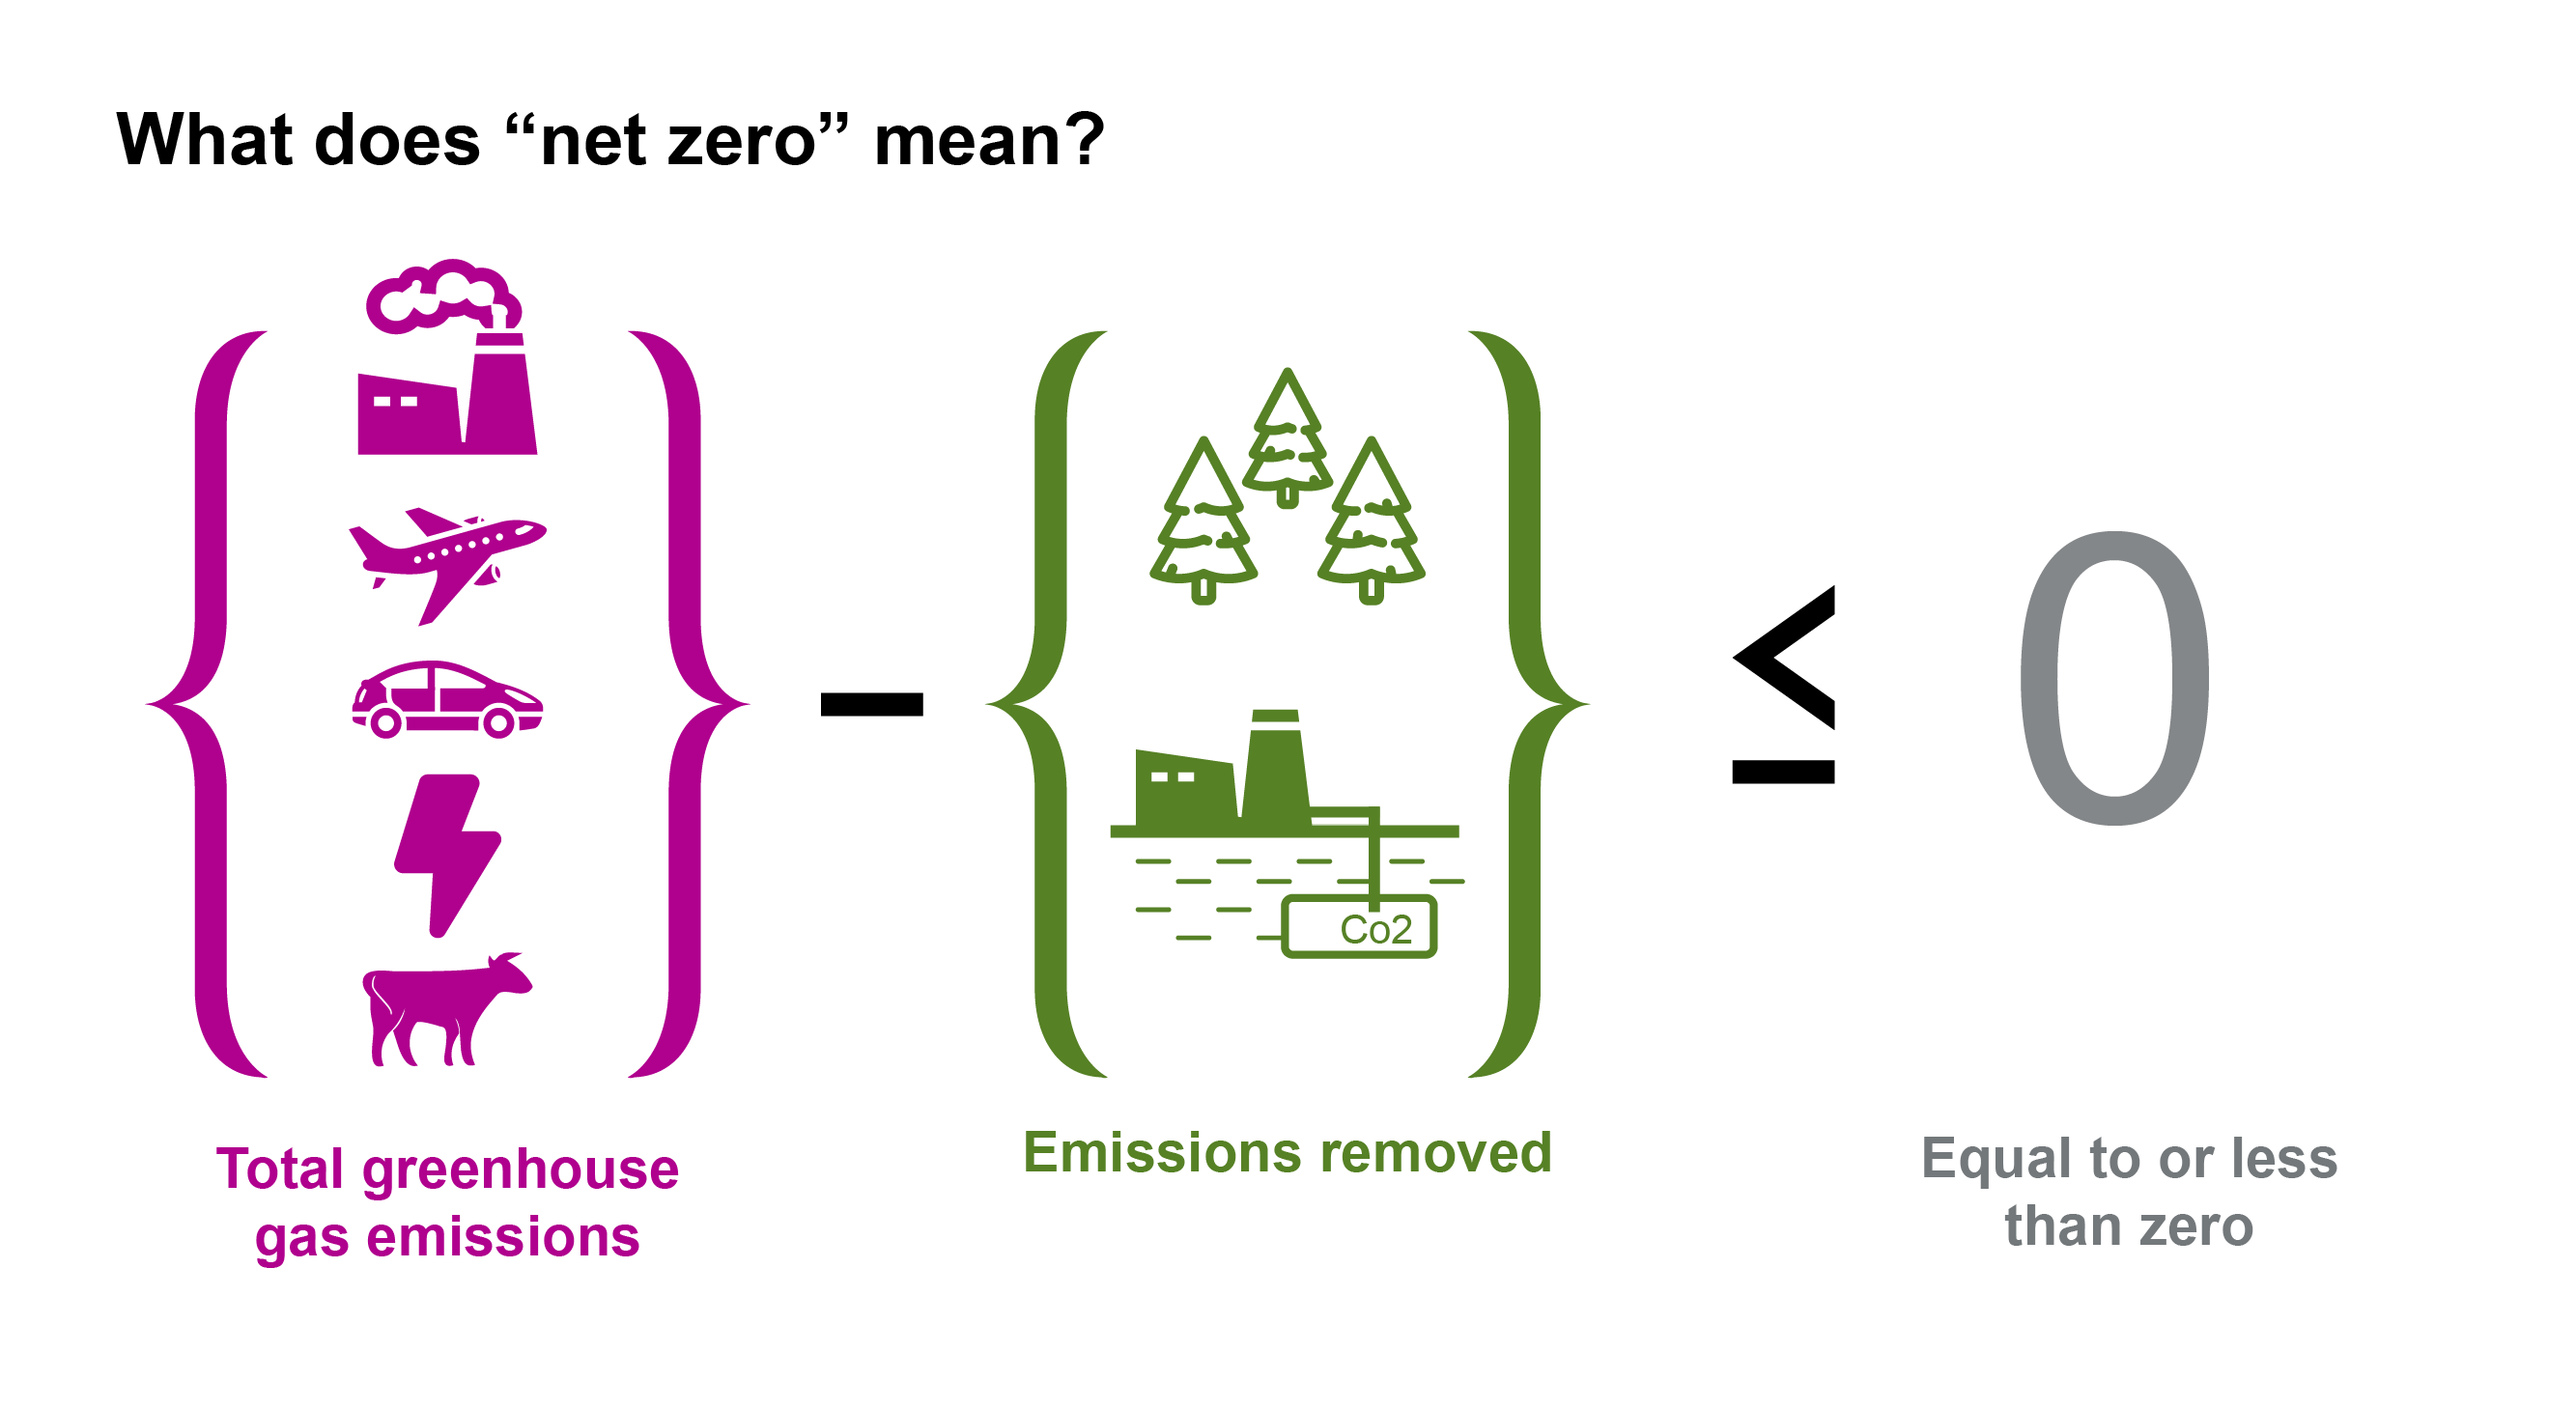 Net zero means, total greenhouse gas emissions minus emissions that are removed.